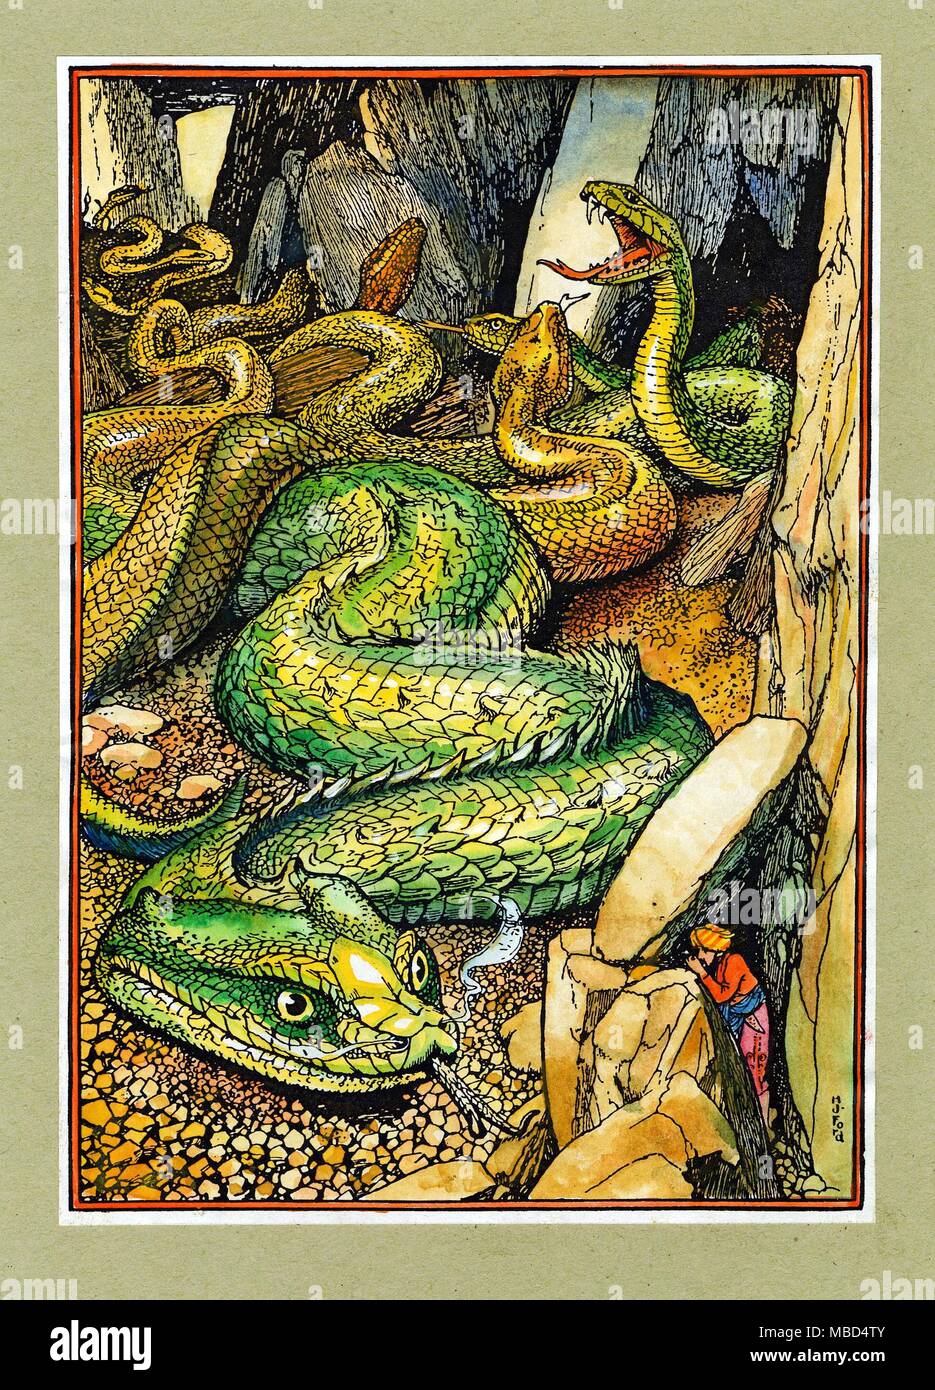 FAIRYTALES - MONSTERS - ALADDIN Aladdin in the Valley of the Serpents. Hand-coloured drawing by H. J. Ford, from the 1908 edition of Andrew Lang's The Arabian Nights Entertainments. Stock Photo